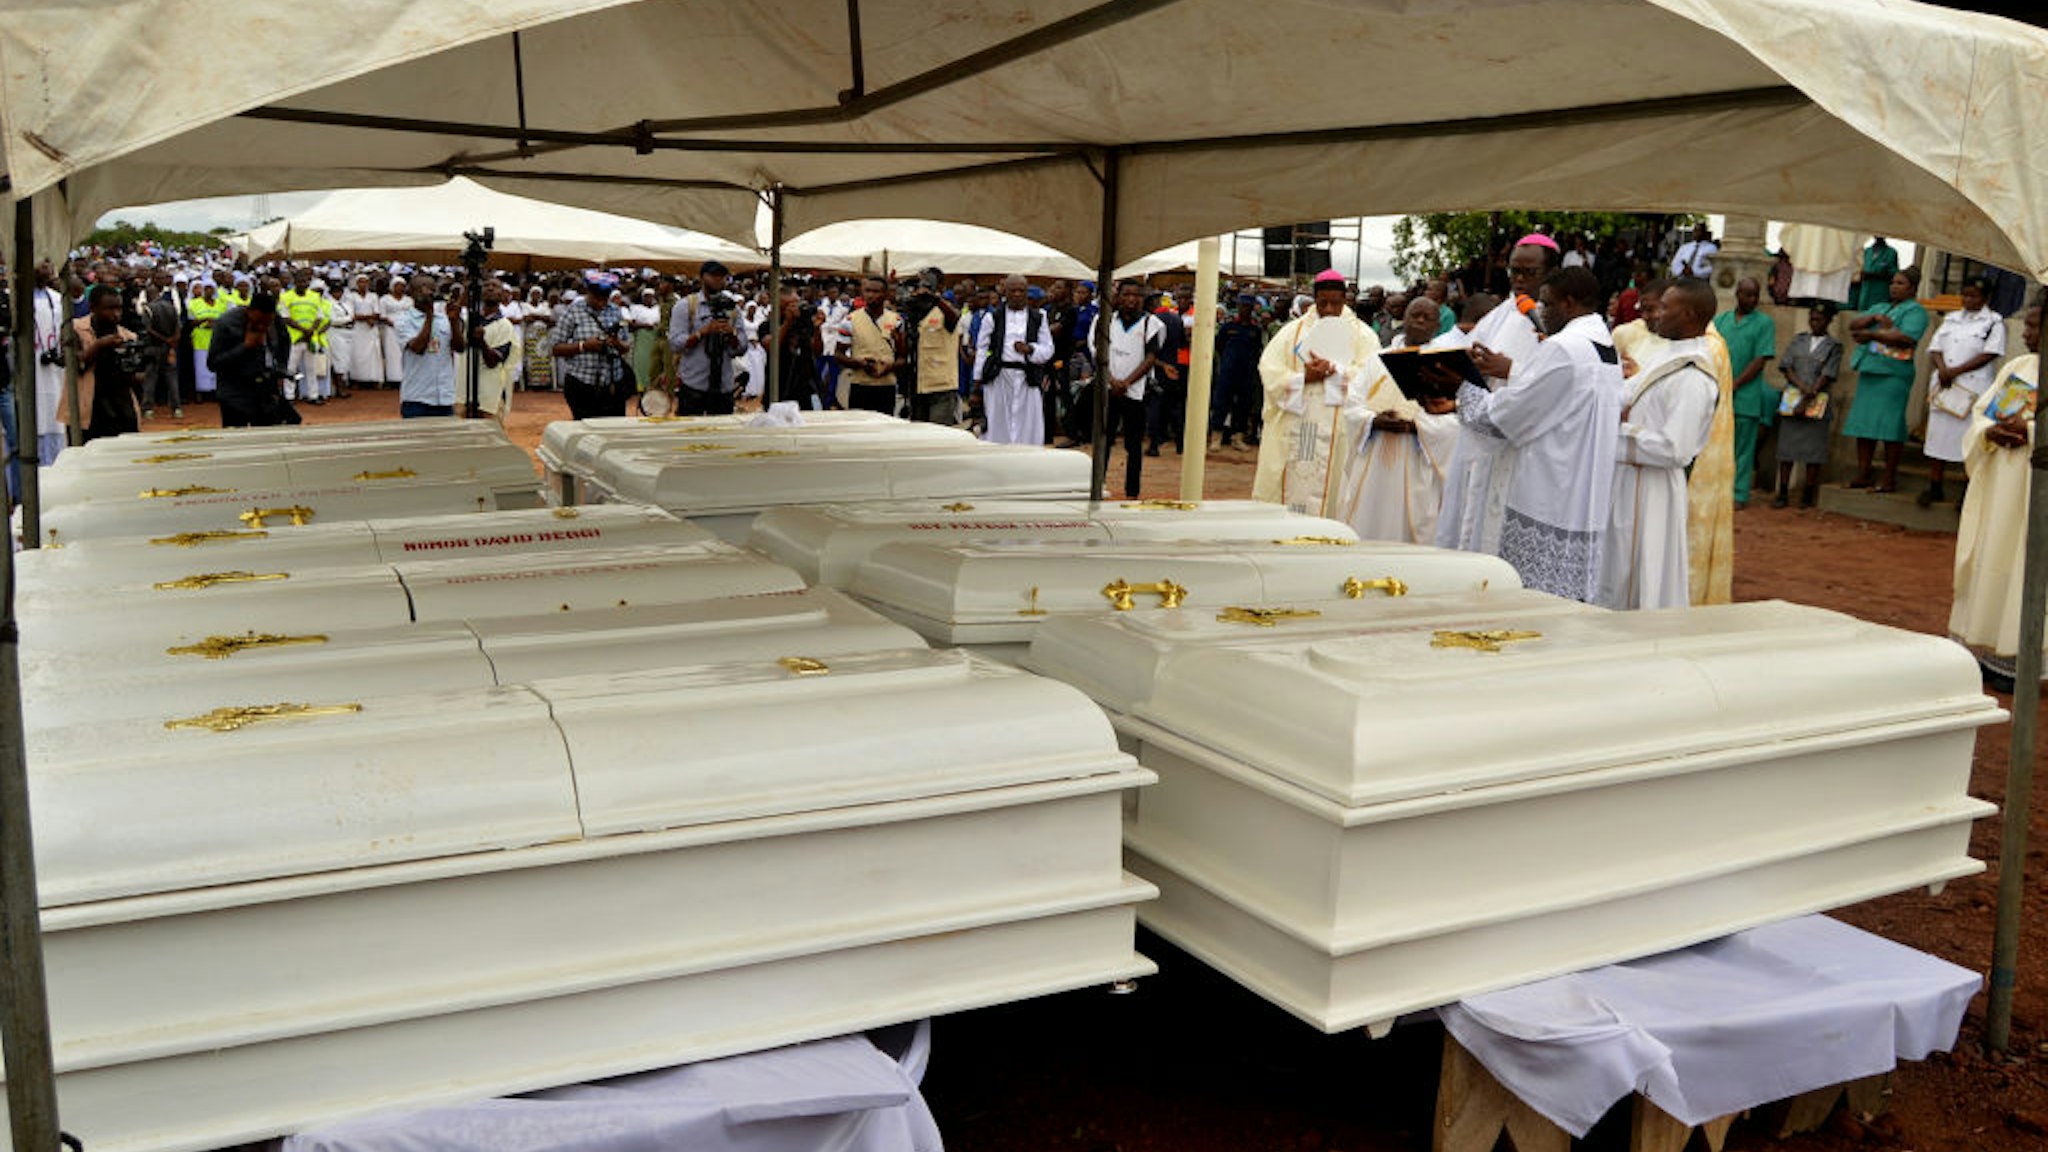 Coffins of 17 worshippers and two priests, who were allegedly killed by Fulani herdsmen stand during a funeral service at Ayati-Ikpayongo in Gwer East district of Benue State, north-central Nigeria on May 22, 2018. - Two Nigerian priests and 17 worshippers have been buried, nearly a month after an attack on their church, as Catholics took to the streets calling for an end to a spiral of violence. White coffins containing the bodies of the clergymen and the members of their congregation were laid to rest in central Benue state, which has been hit by a wave of deadly unrest.